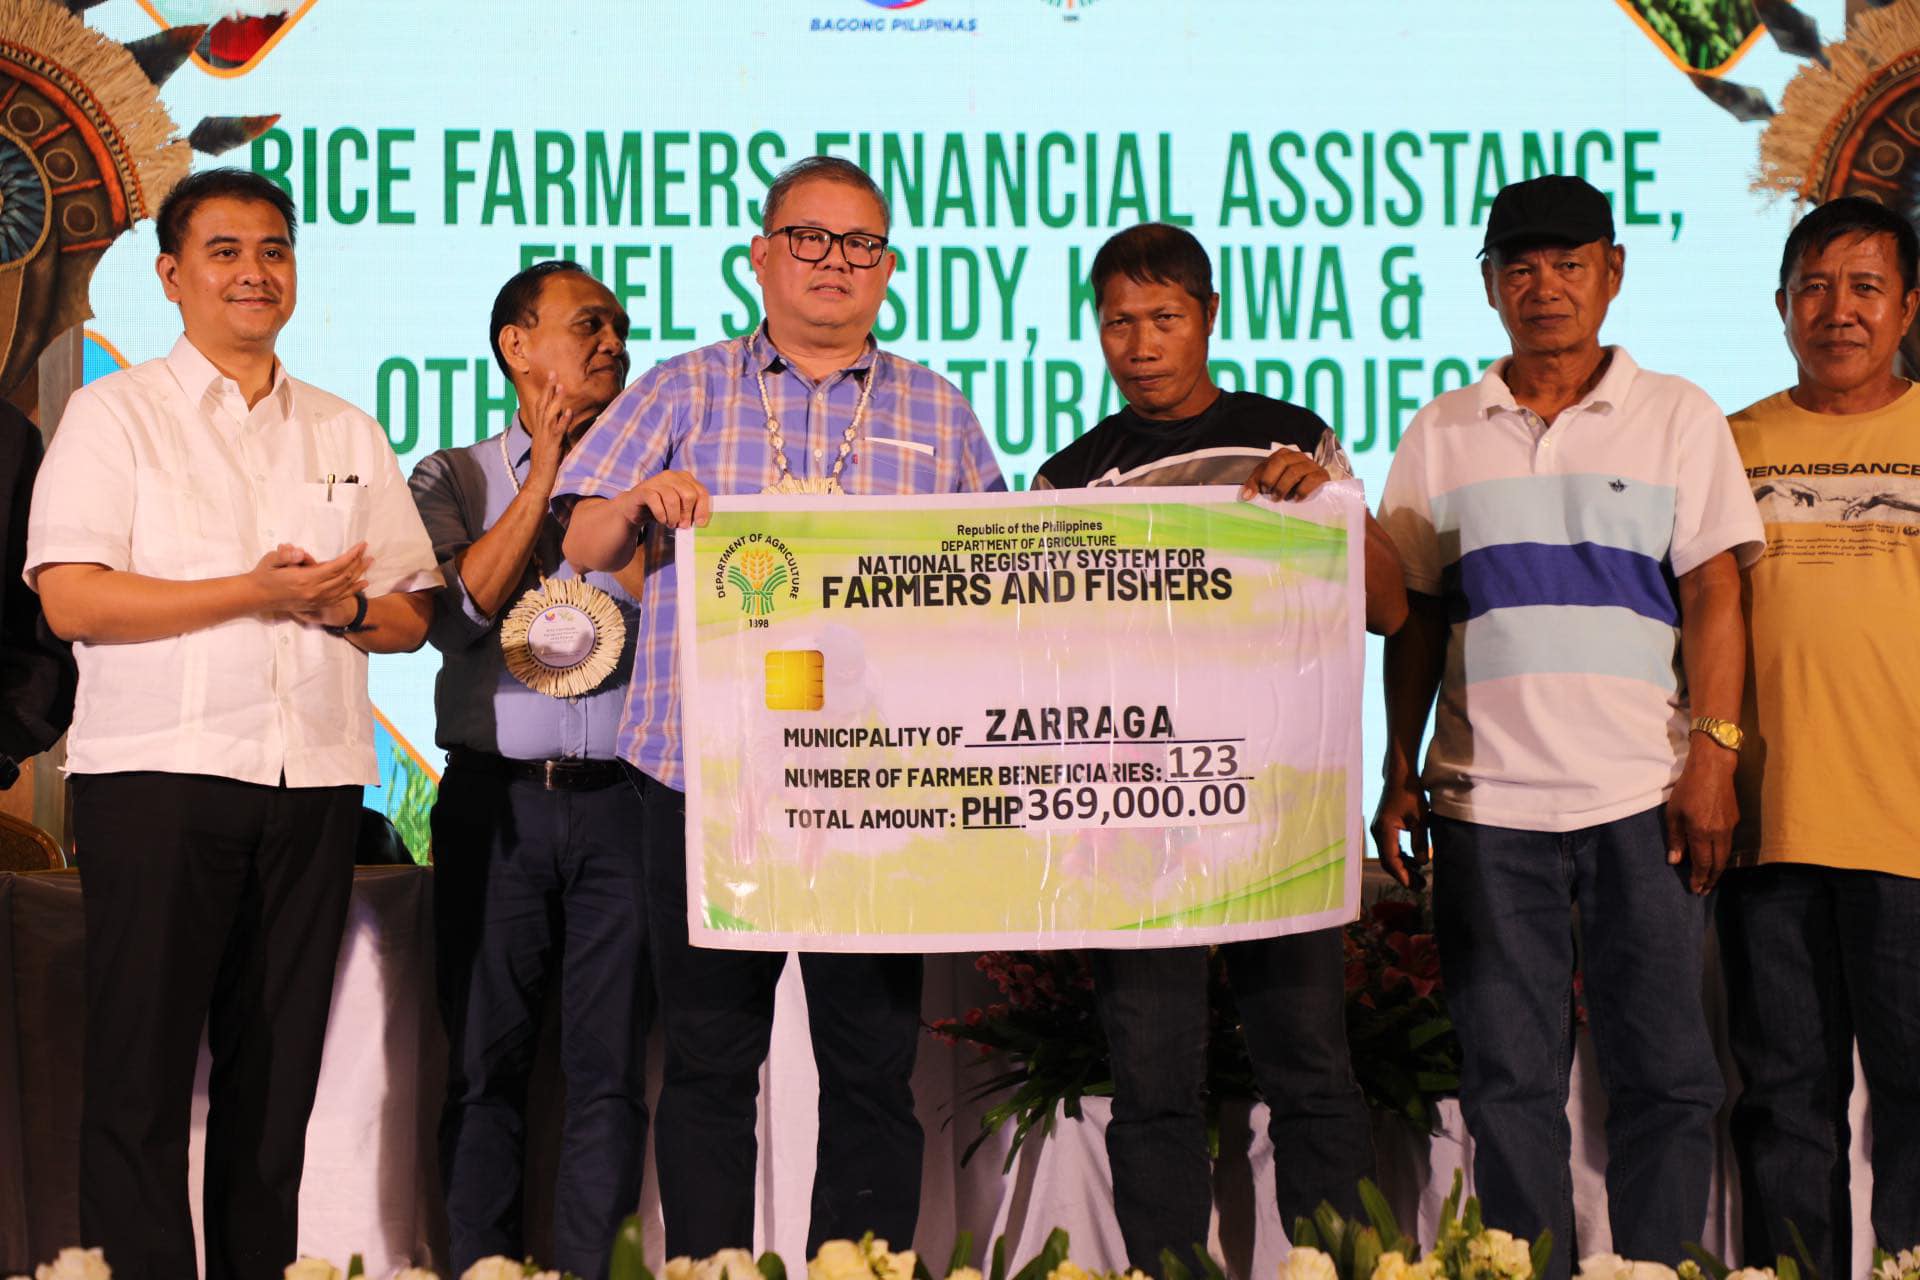 The Department of Agriculture (DA) said that it distributed various financial assistance and agricultural machinery for farmers and fisherfolk in Iloilo.